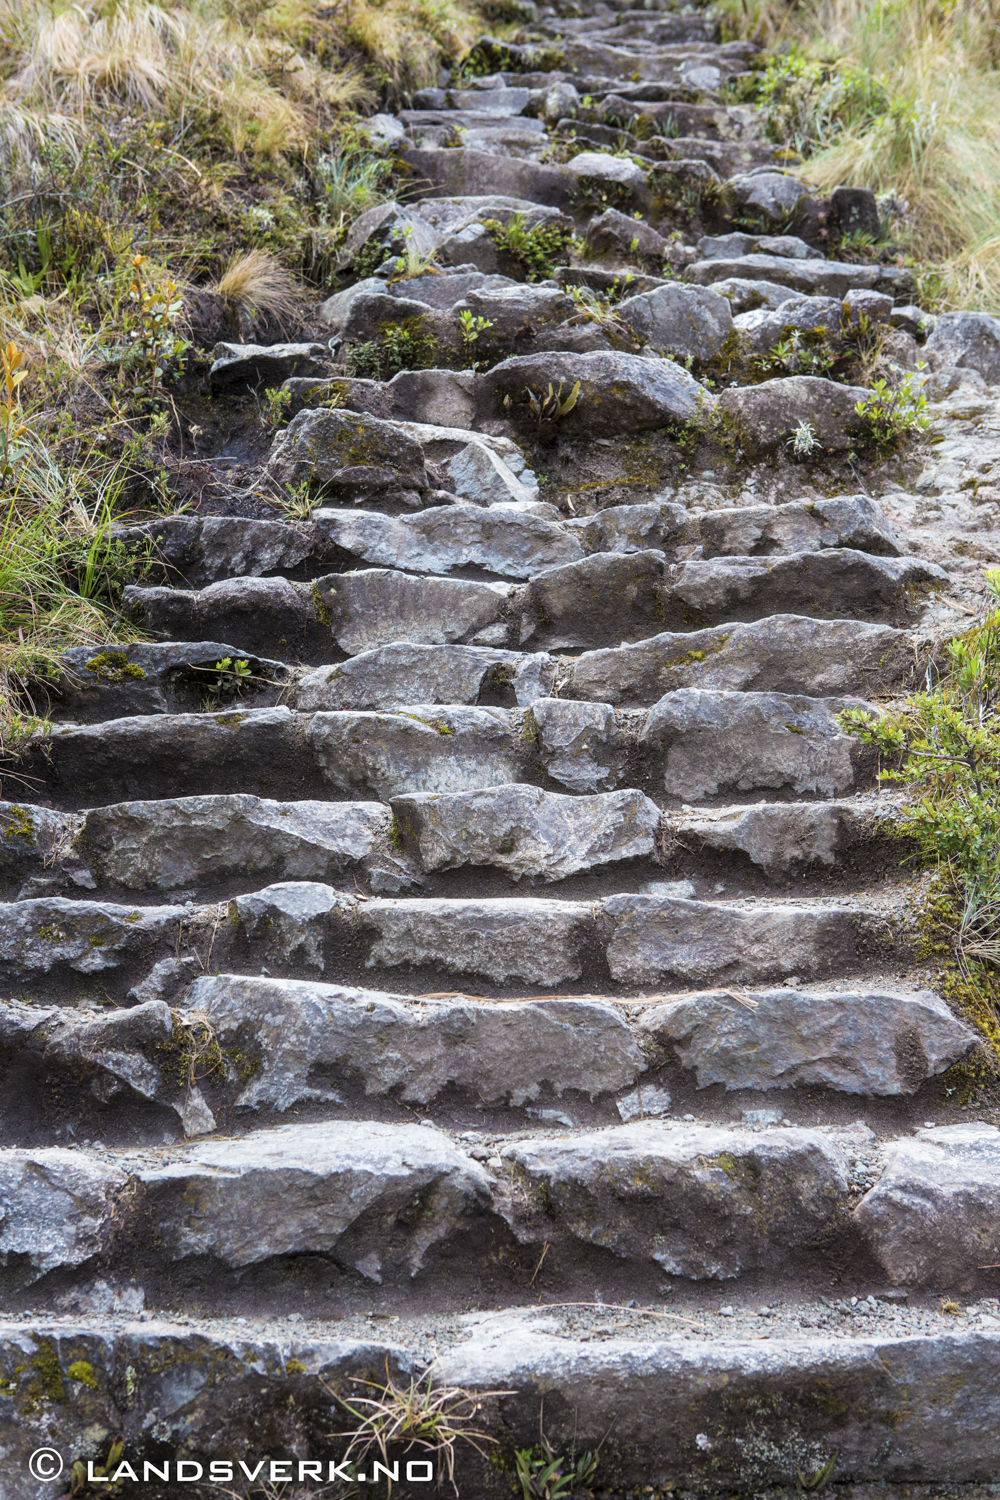 Thousands of stairs.. The Inka Trail to Machu Picchu, Peru. 

(Canon EOS 5D Mark III / Canon EF 24-70mm 
f/2.8 L USM)